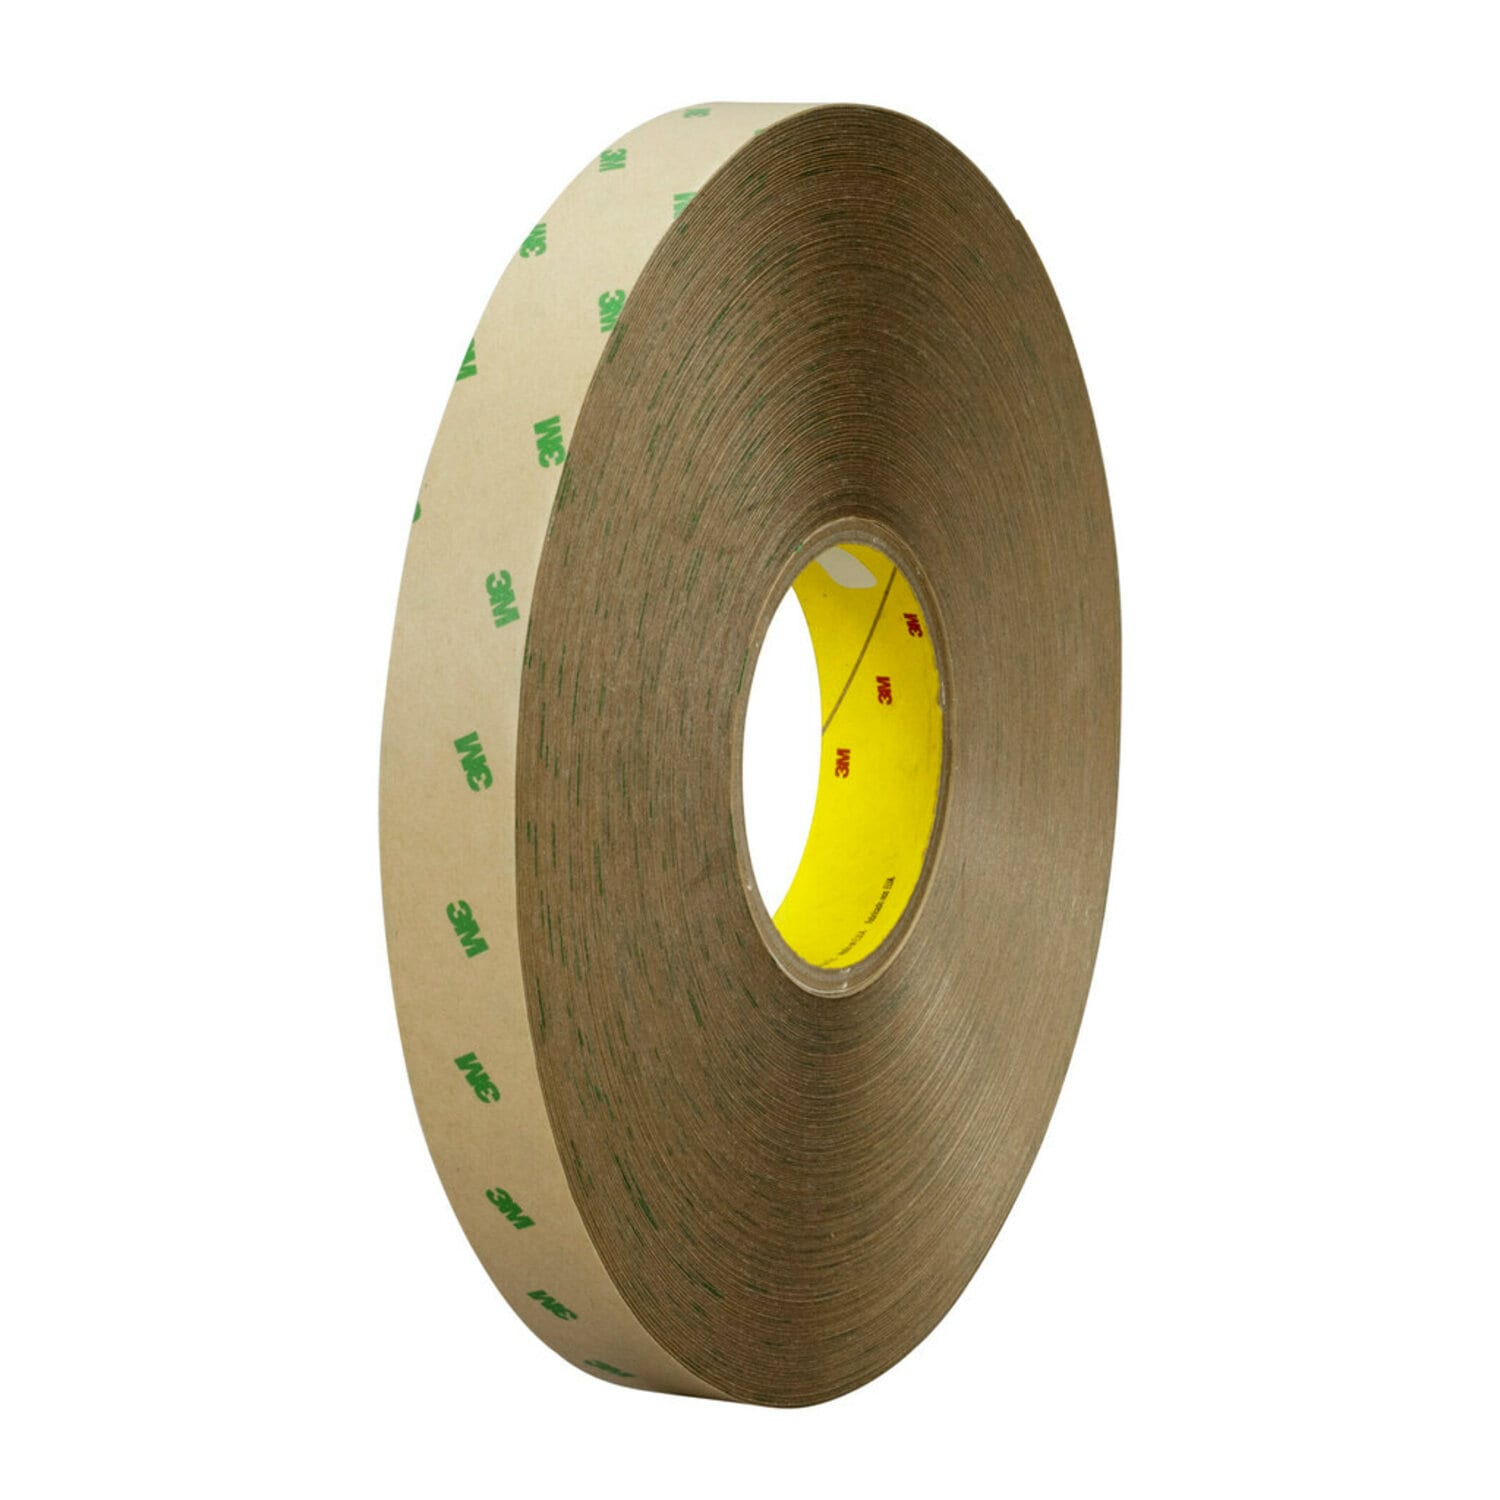 7100012314 - 3M Adhesive Transfer Tape 9505, Clear, 5 mil, Roll, Config